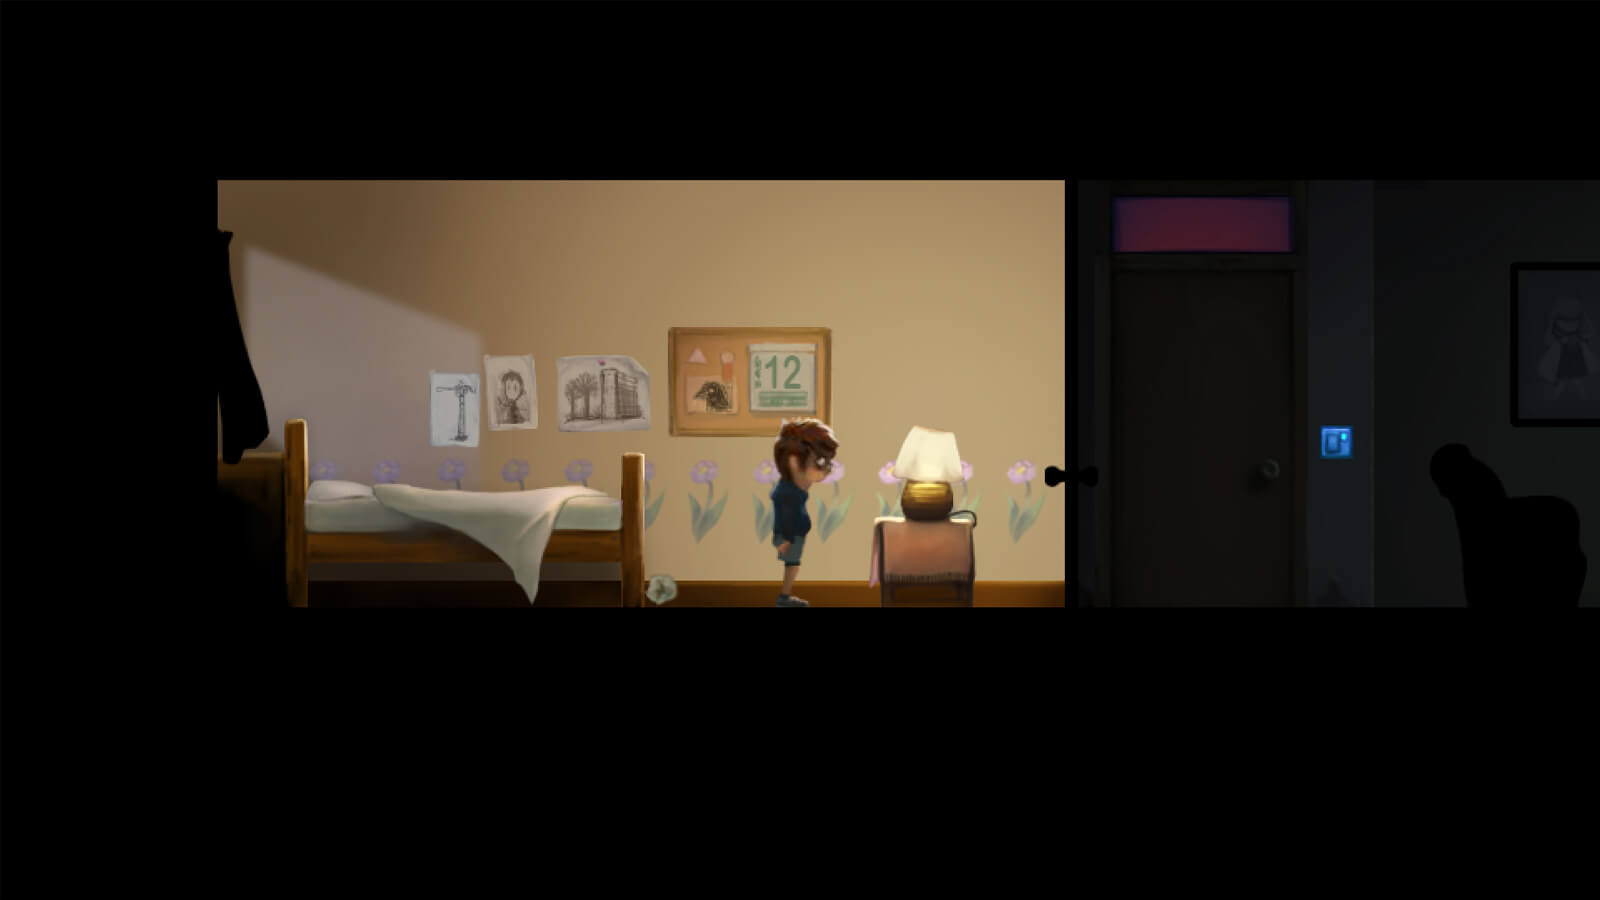 The player's character stands in front of a desk lamp. Hand drawn pictures can be seen on the wall behind him.